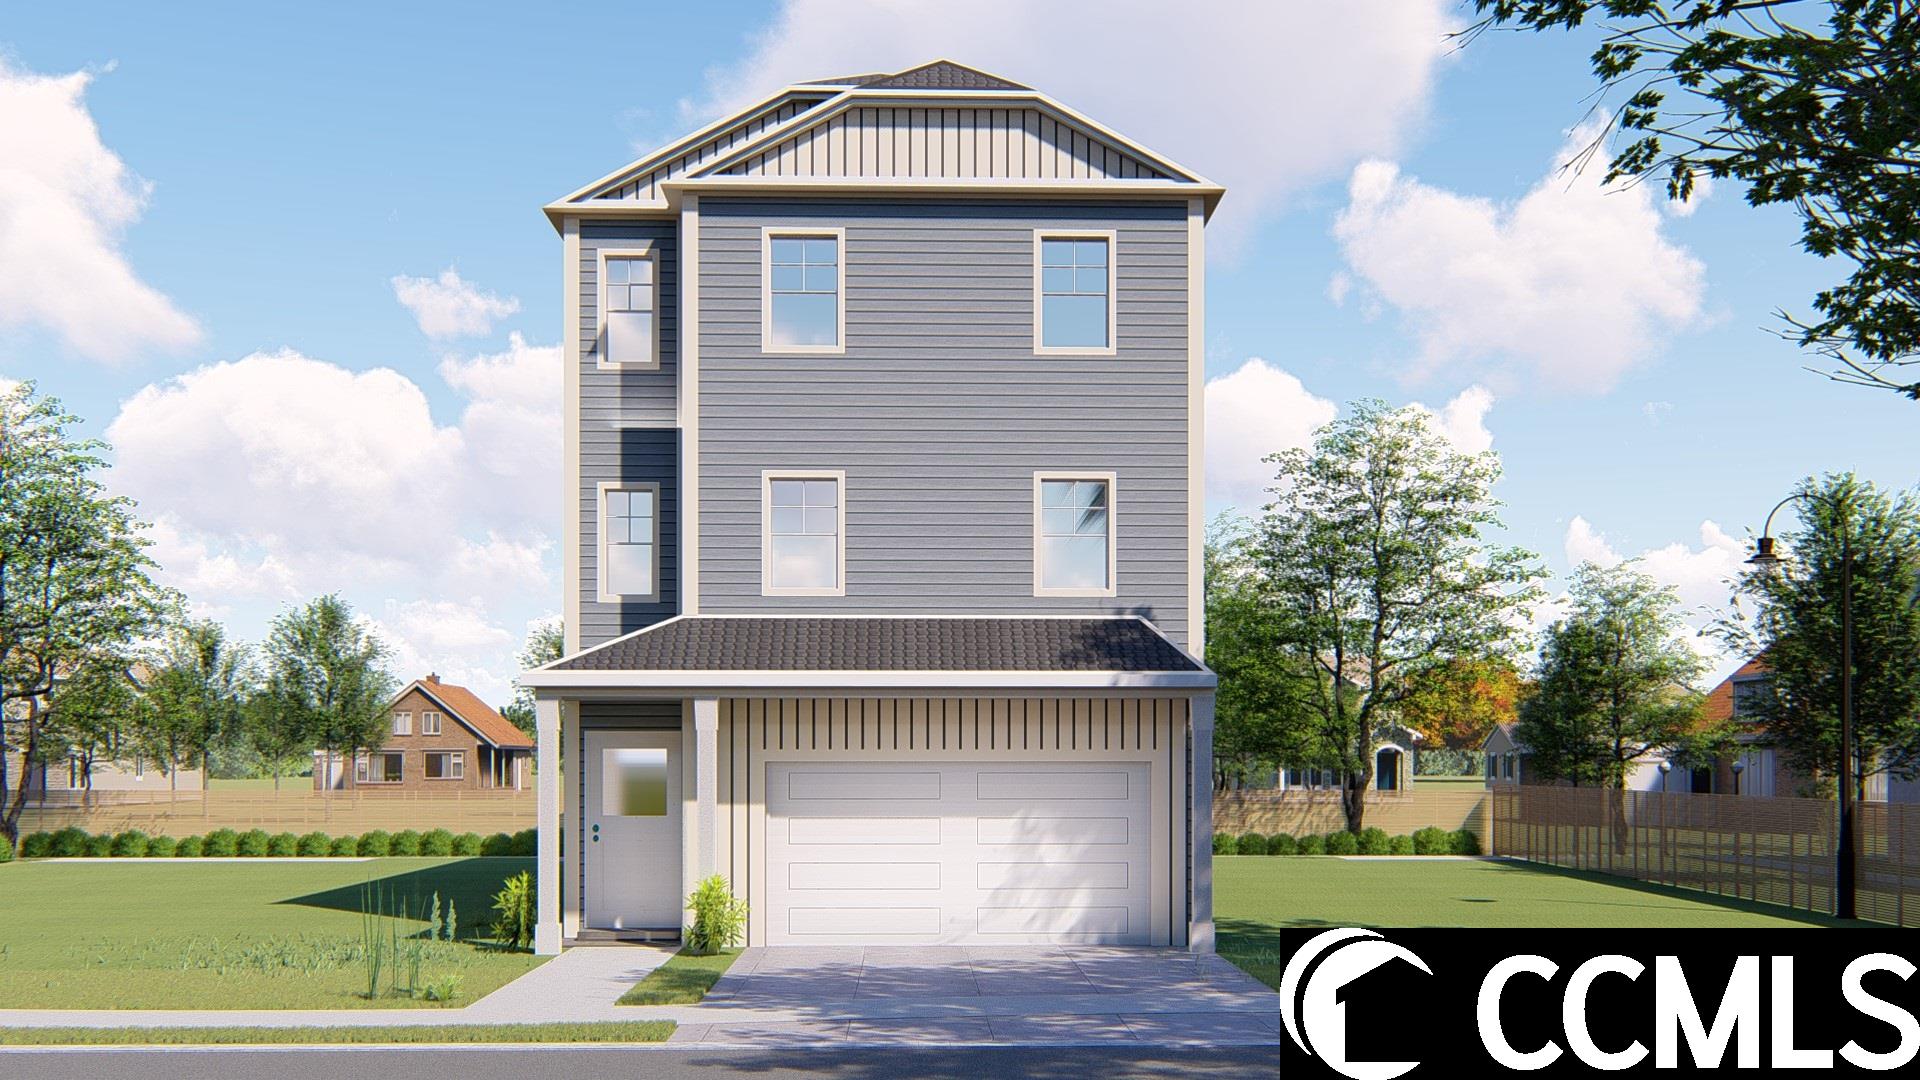 *these renderings are for visual use only. colors and details may vary per plan.* raised beach with covered front porch, 3 bdrm, 3.5 baths, recreational room downstairs,  open dining area, act now to choose selections!construction began in dec 2023. 8-12 months to completion. broker owned.